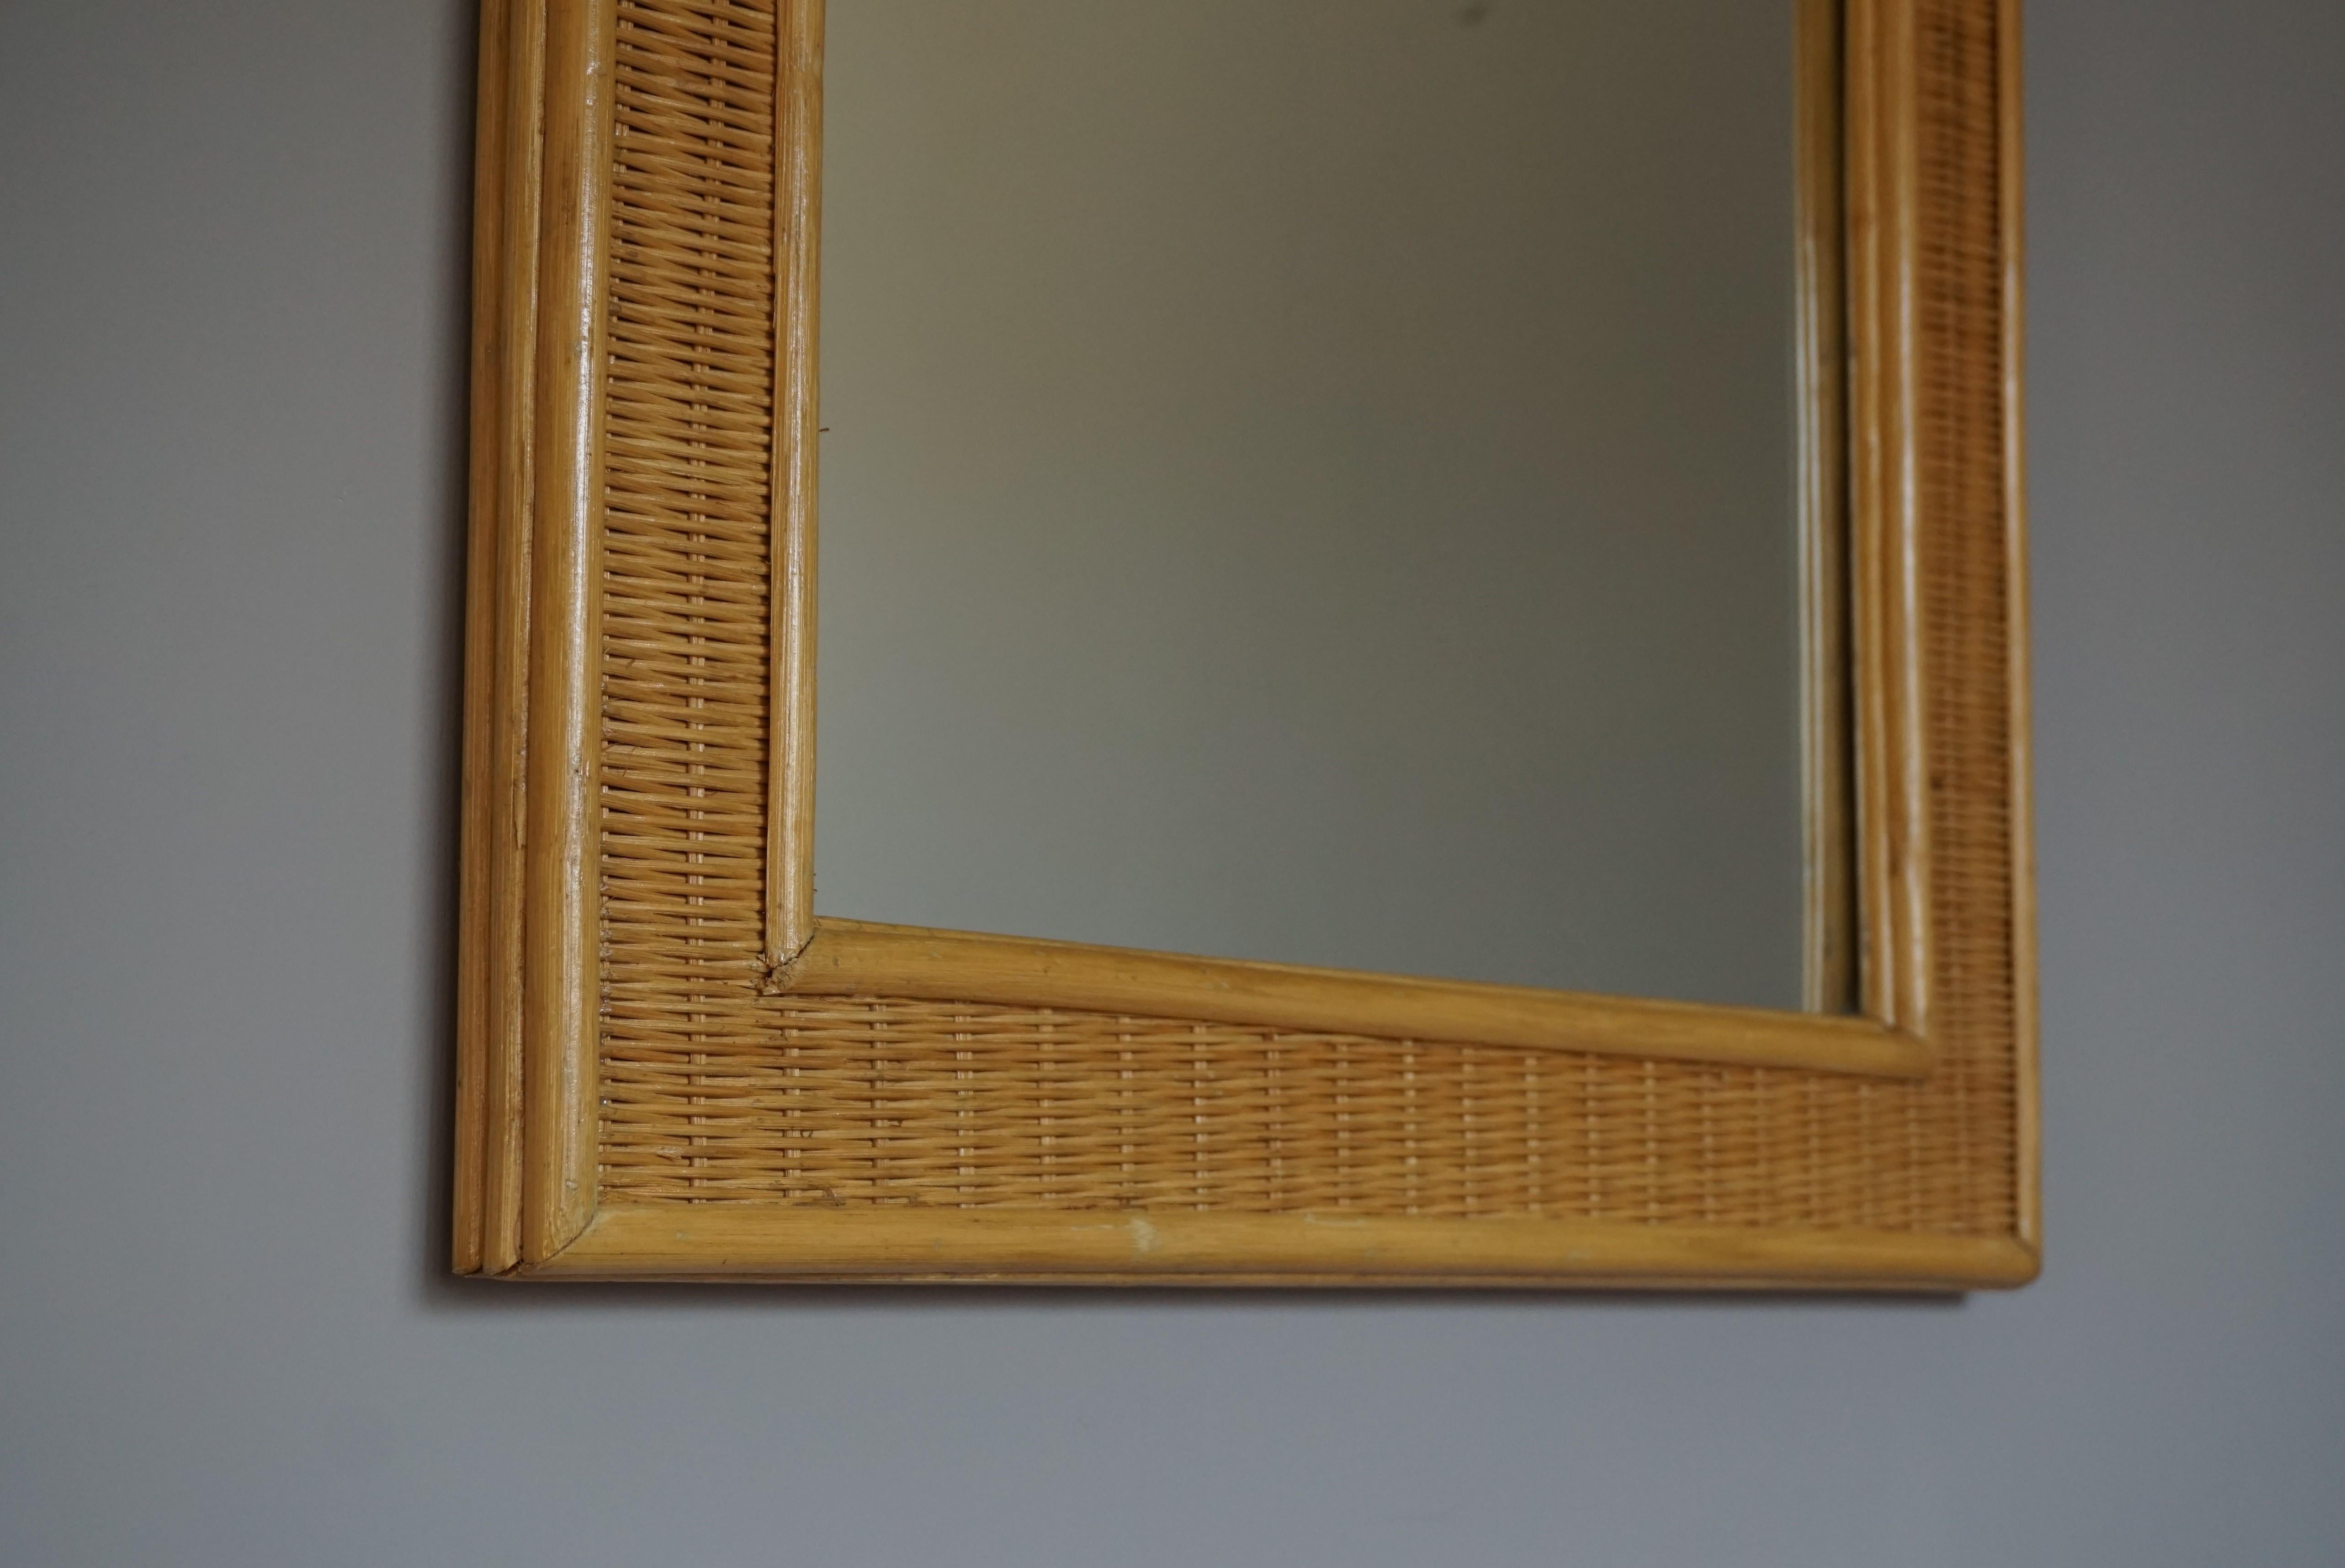 European Rare and Handcrafted Midcentury Organic Rattan and Wicker Frame Wall Mirror 1970 For Sale